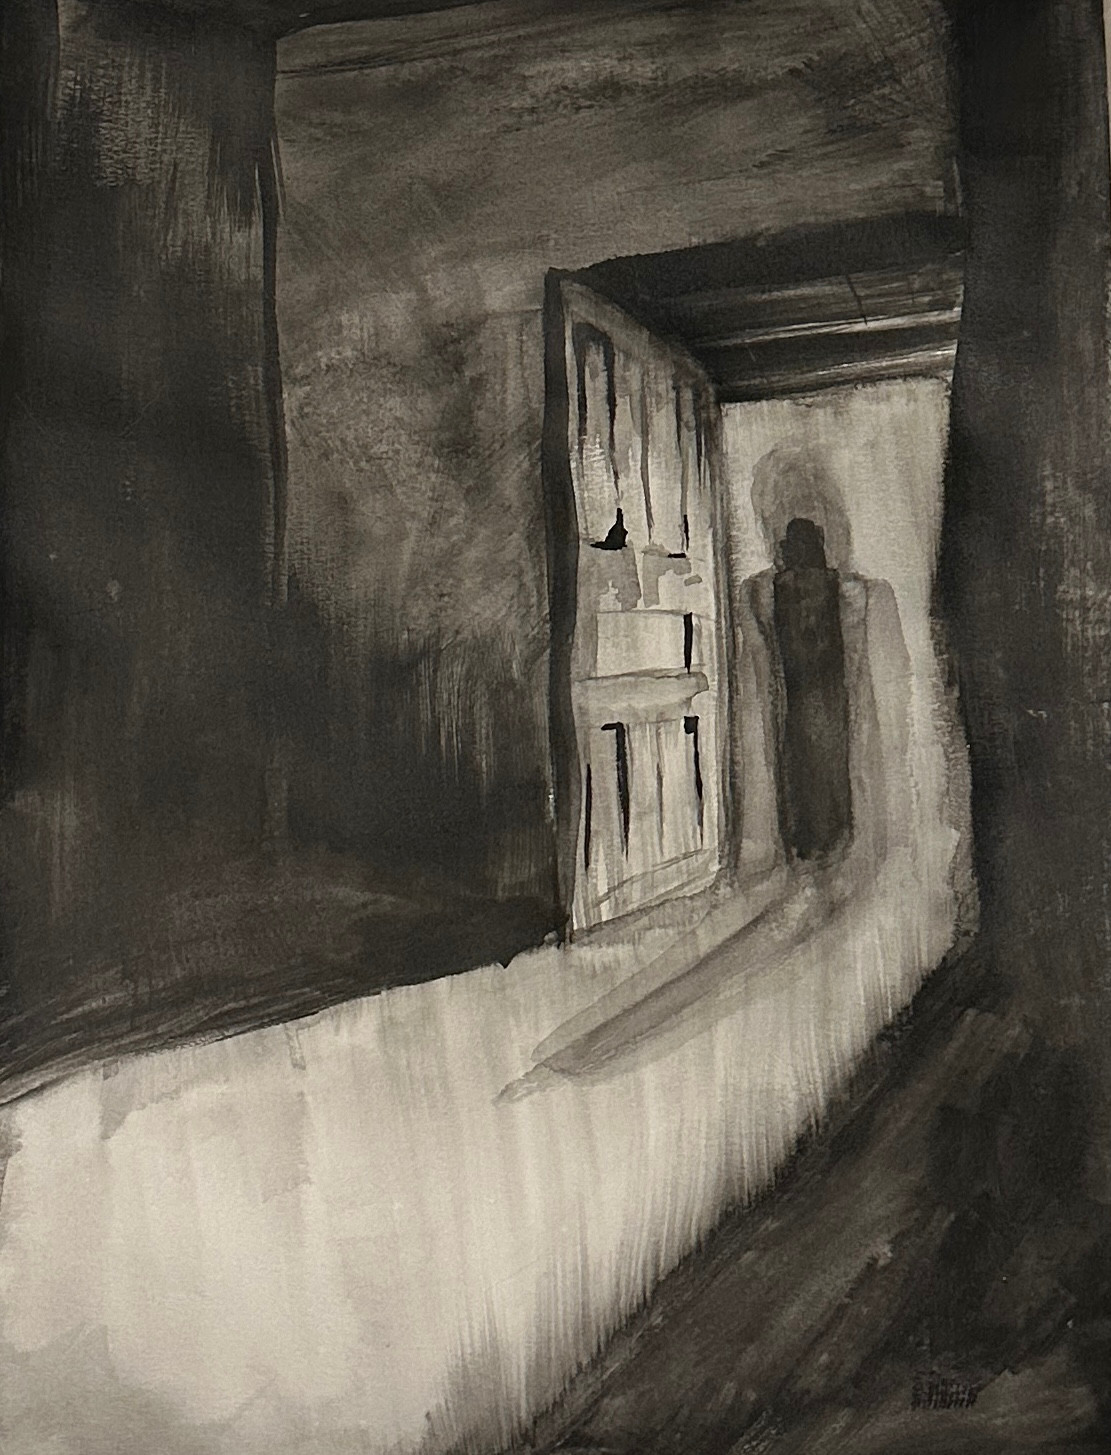 A dark room. An open door. A looming shadow-person in the light.